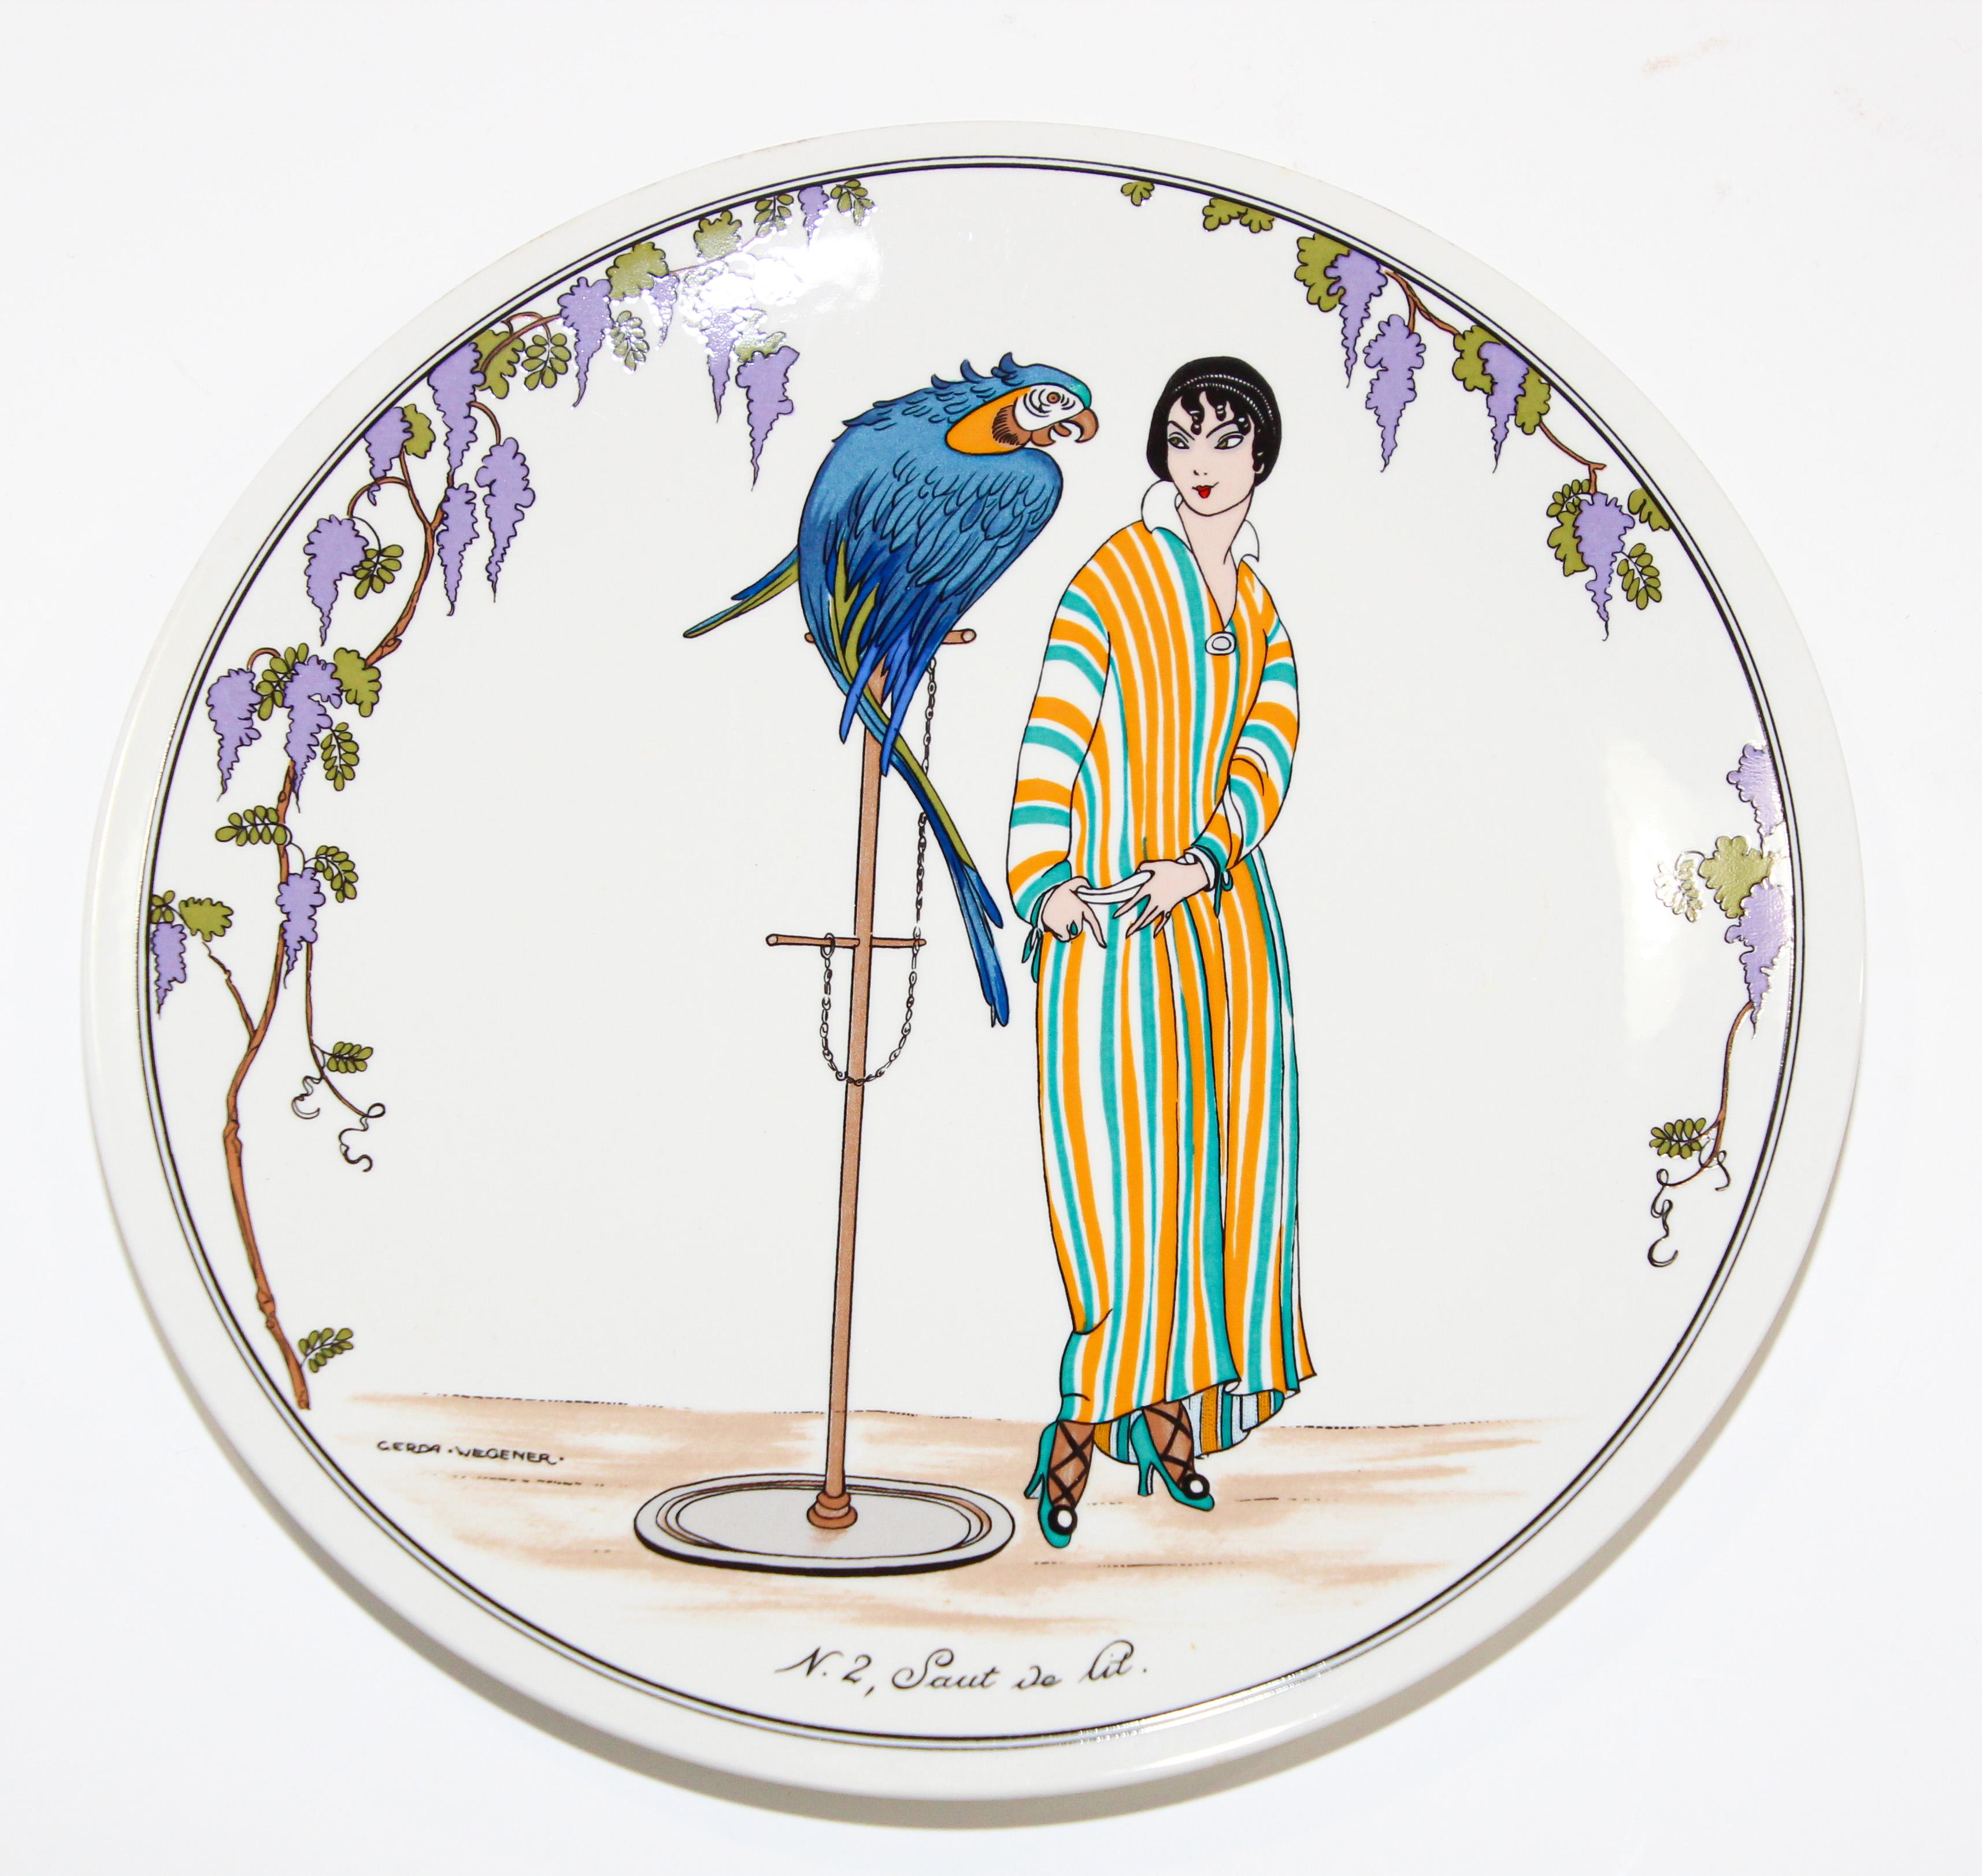 Vintage Villeroy and Boch 1900 Art Deco design, woman with parrot.
Villeroy & Boch Design 1900 Porcelain collectible plate.
The subjects collection are taken from ancient lithographies and are signed and designed by different artists.
The plate